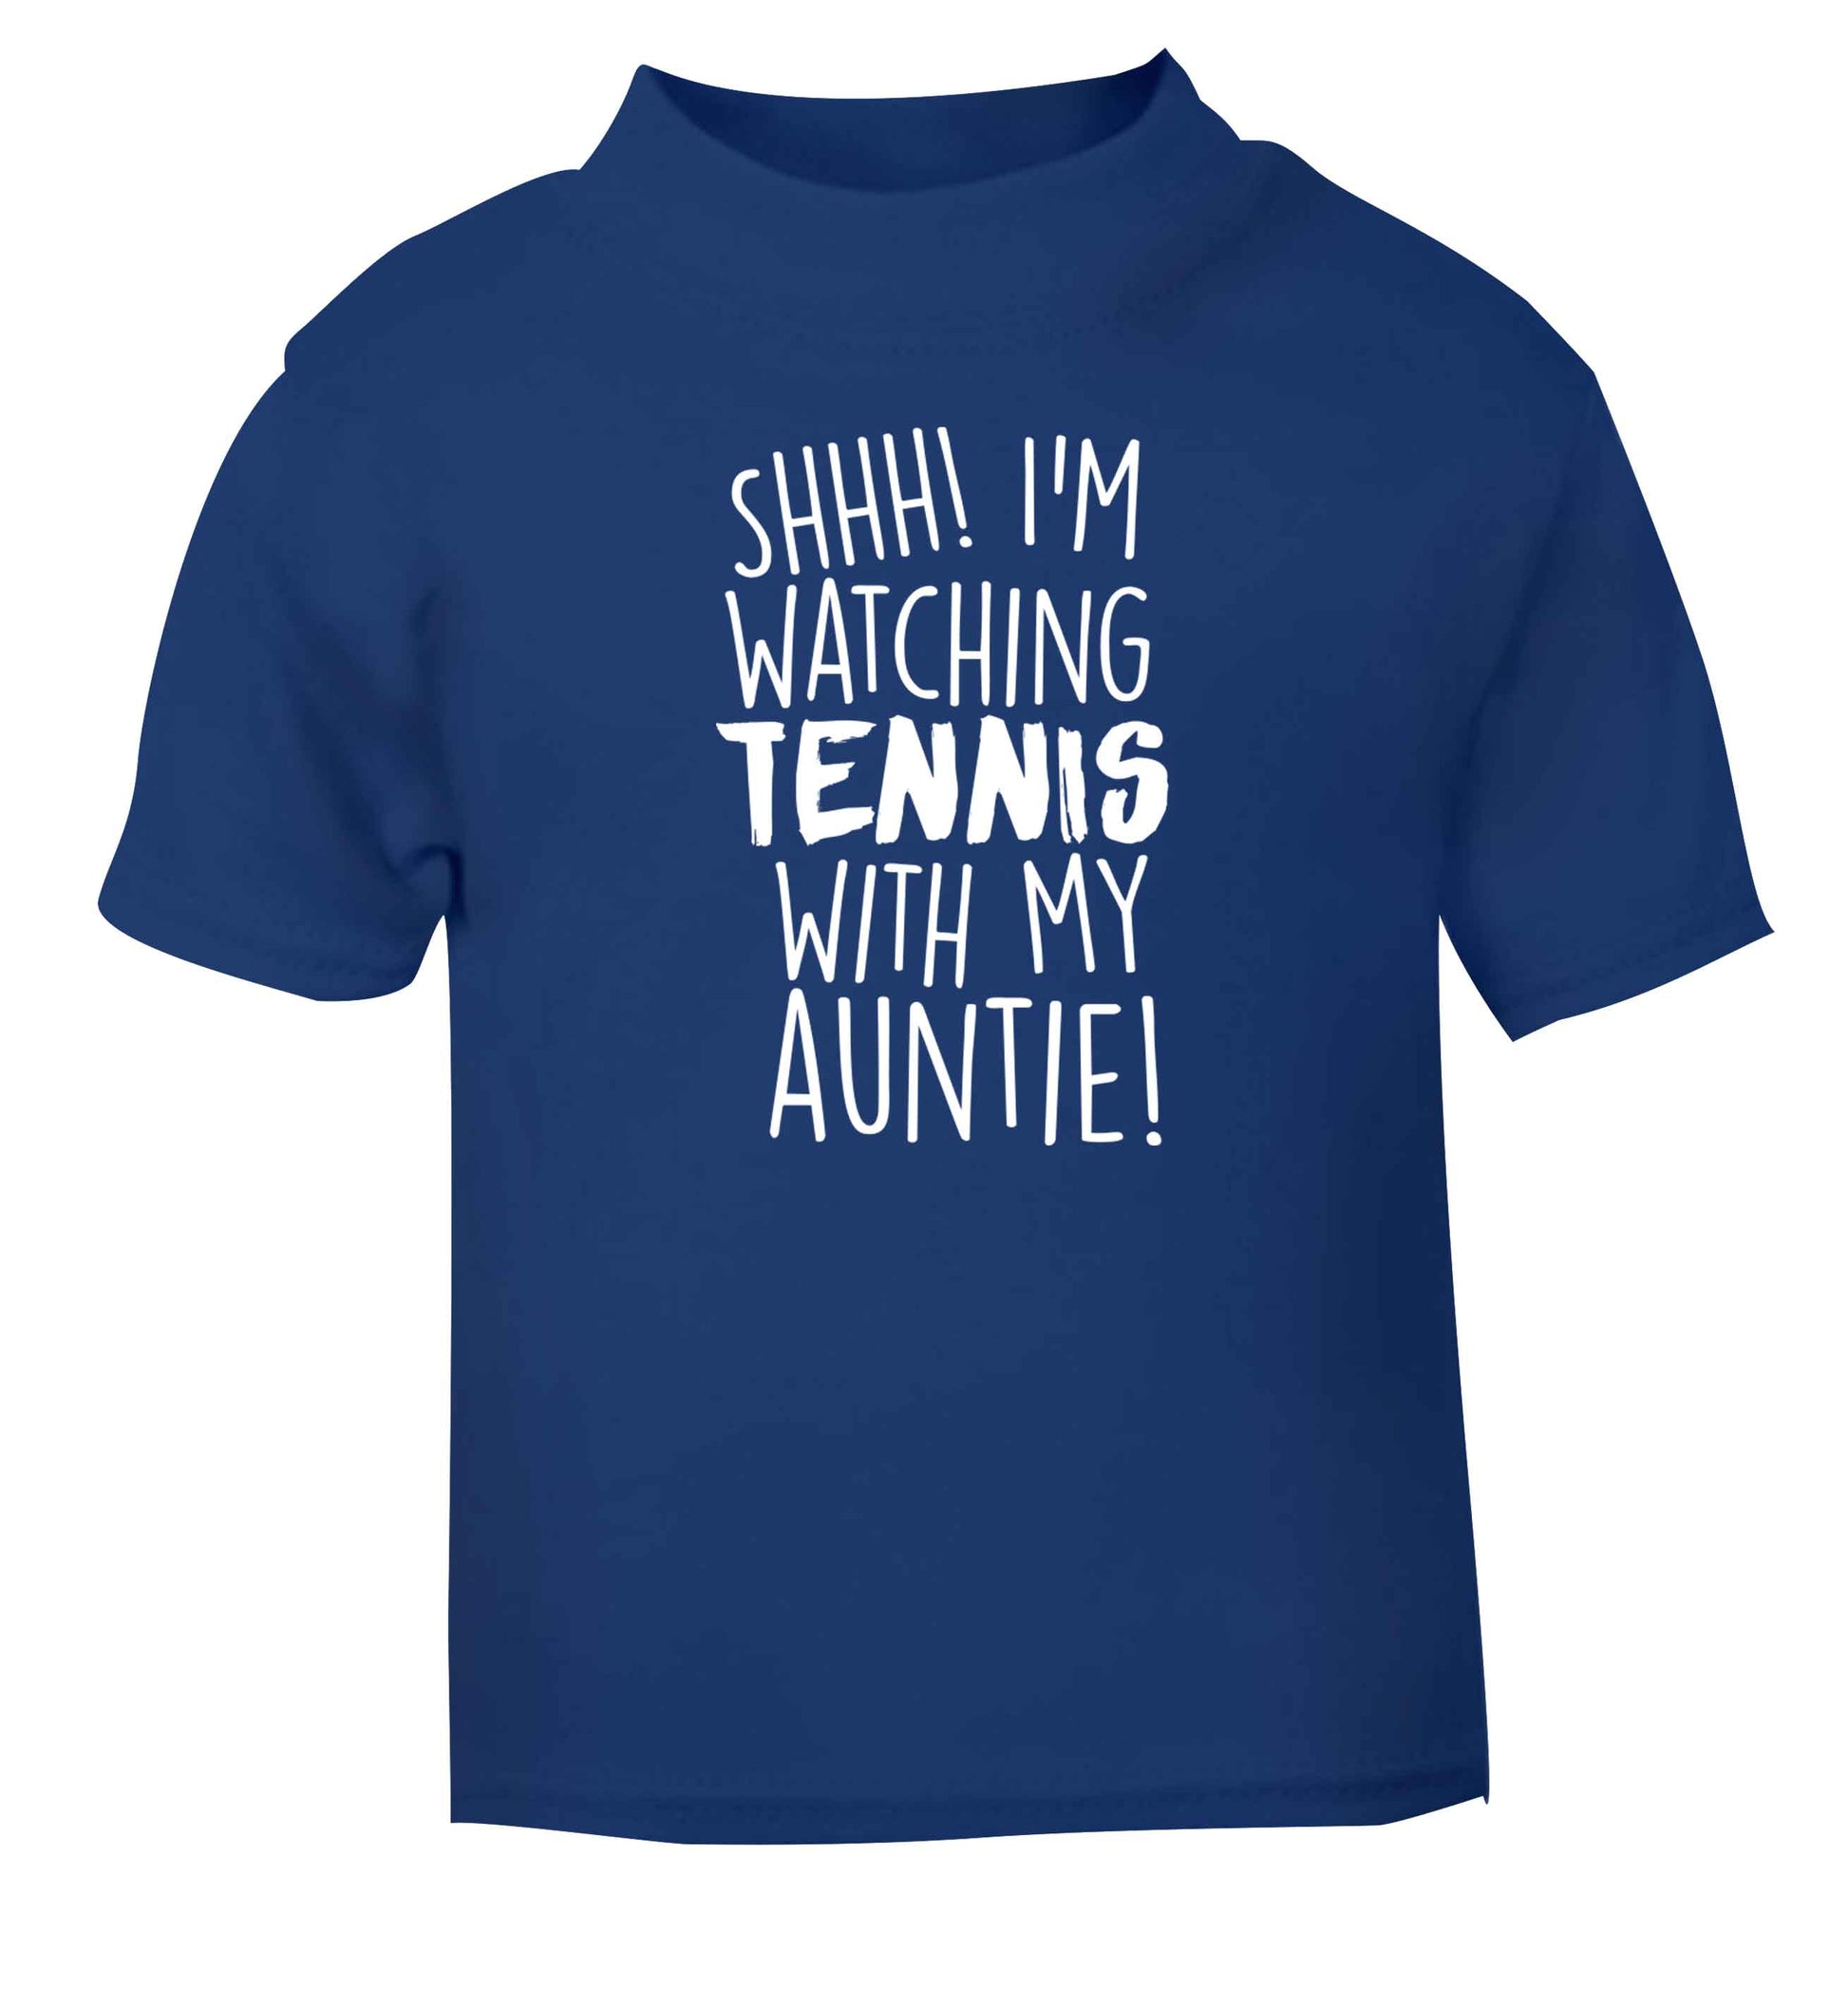 Shh! I'm watching tennis with my auntie! blue Baby Toddler Tshirt 2 Years